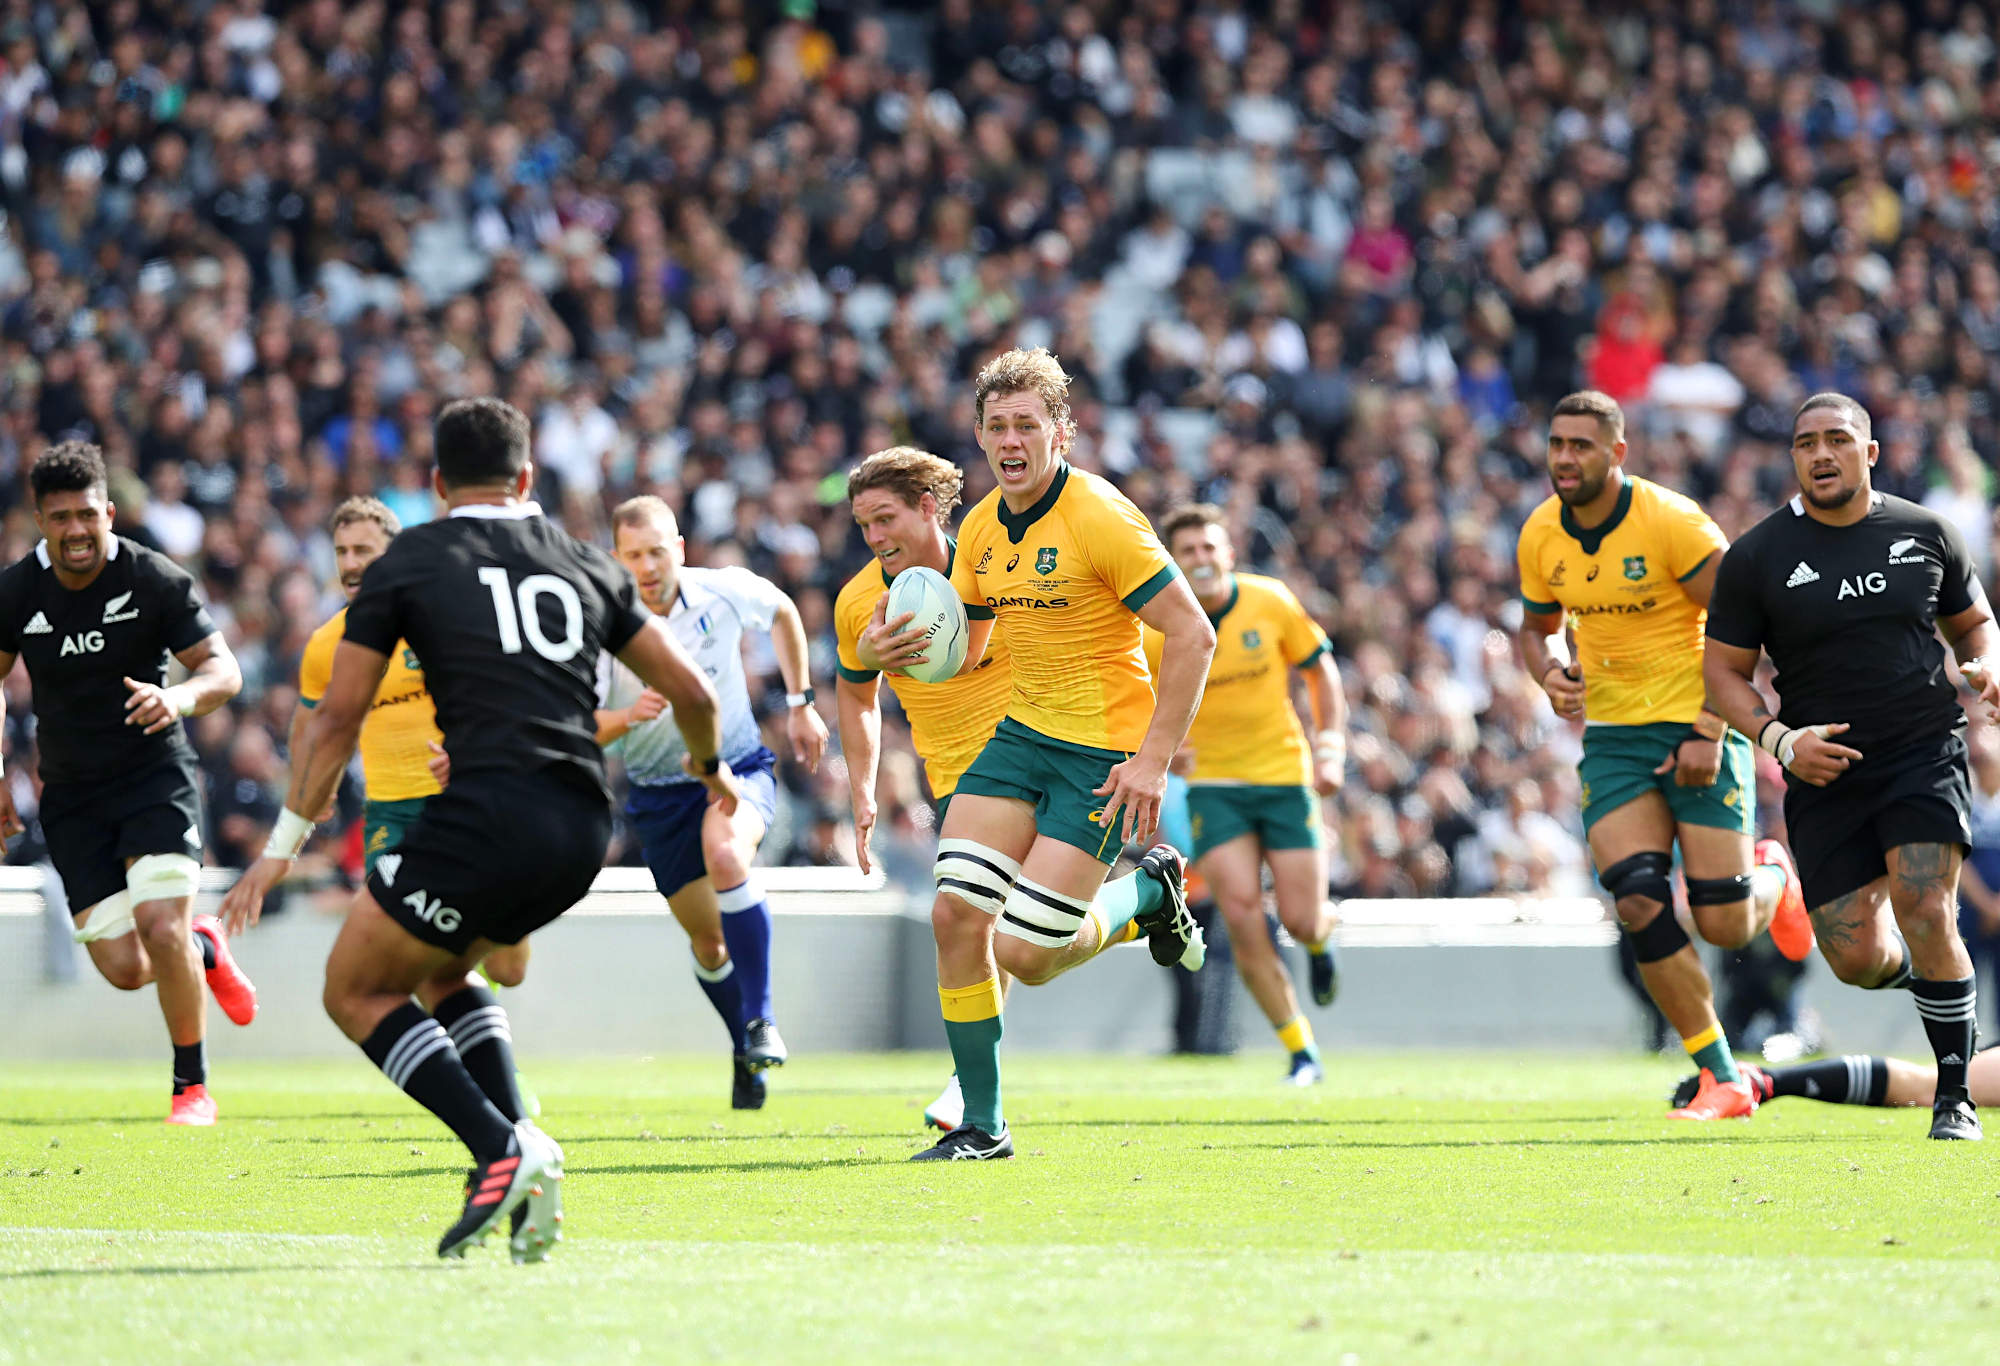 Ned Hanigan of the Wallabies makes a break